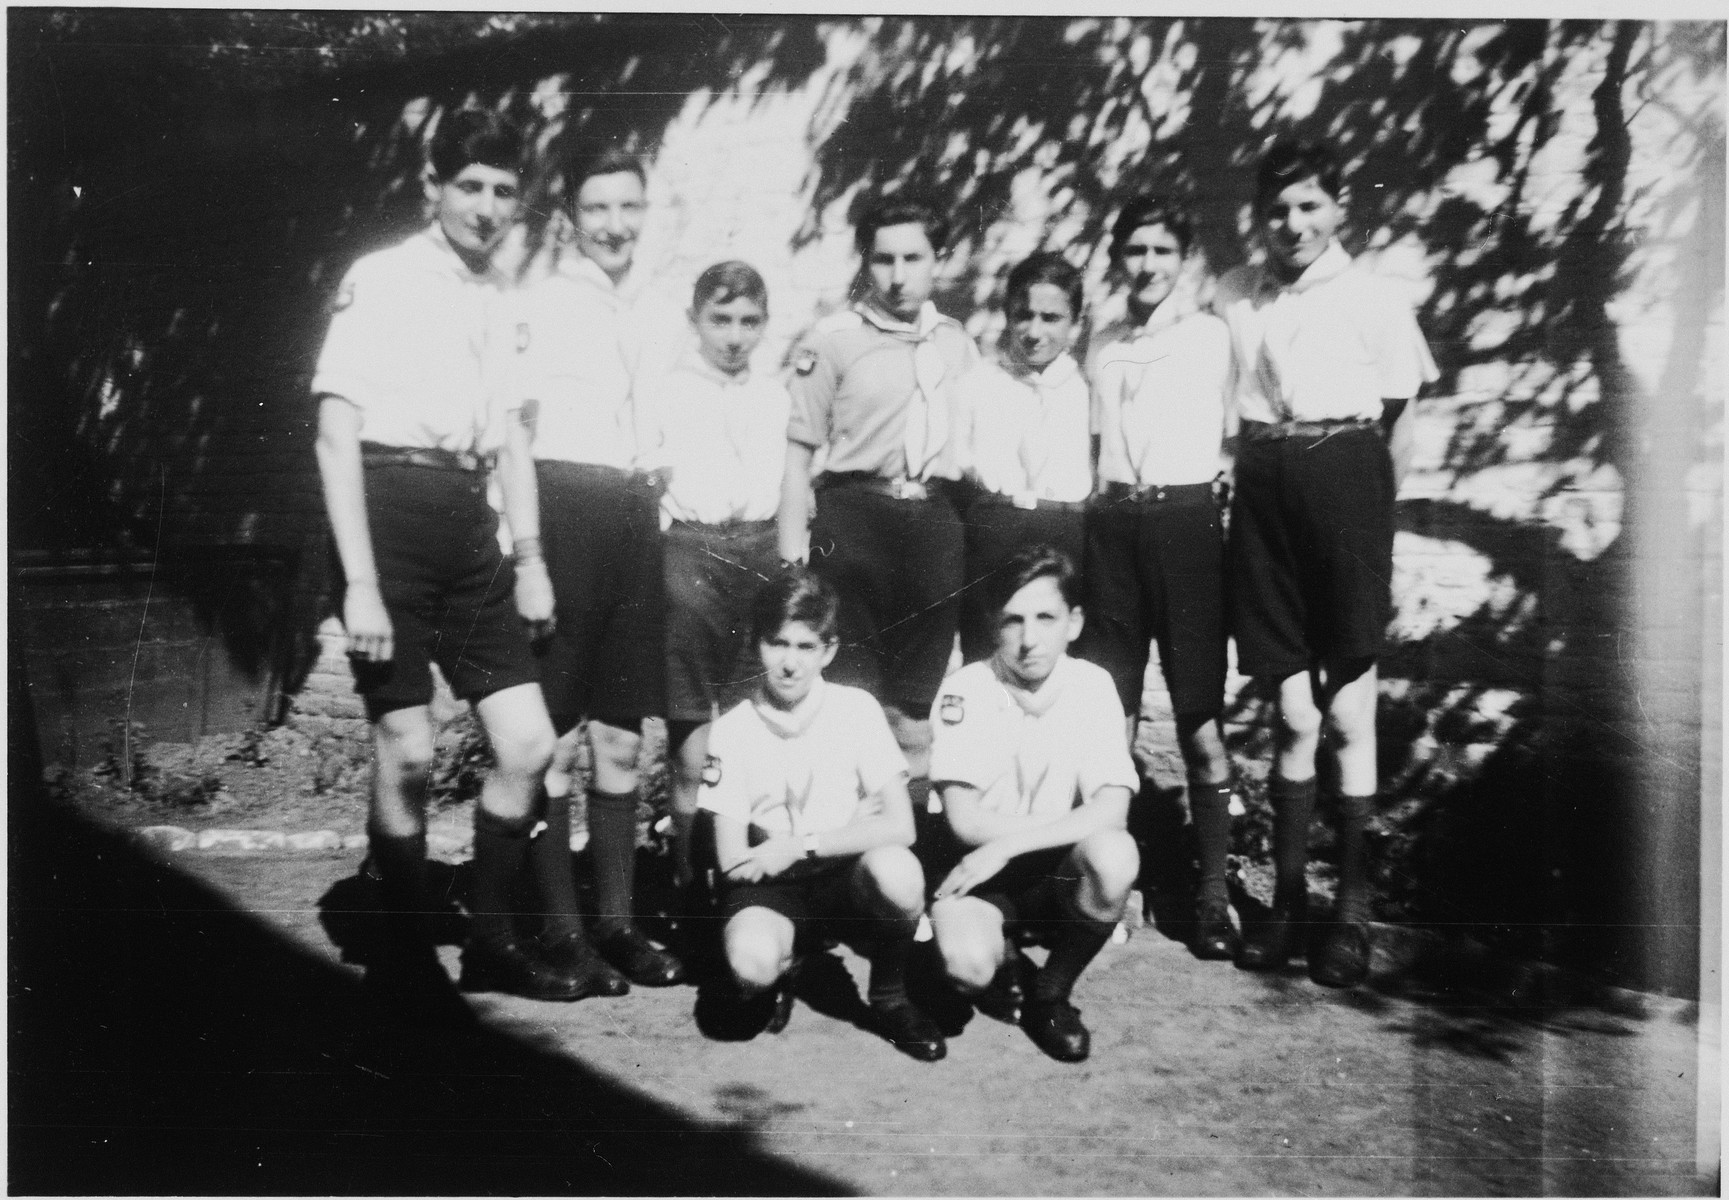 Group portrait of members of the Tel Chai Zionist youth group at the Orphelinat Israelite de Bruxelles children's home of the rue des Patriotes.

Among those pictured are: Joseph Gerber, Charles Amsel, Gabi Lehrer, Albert Tennenbaum, Joseph Adler, David Finkelstein, and Manfred Somer.